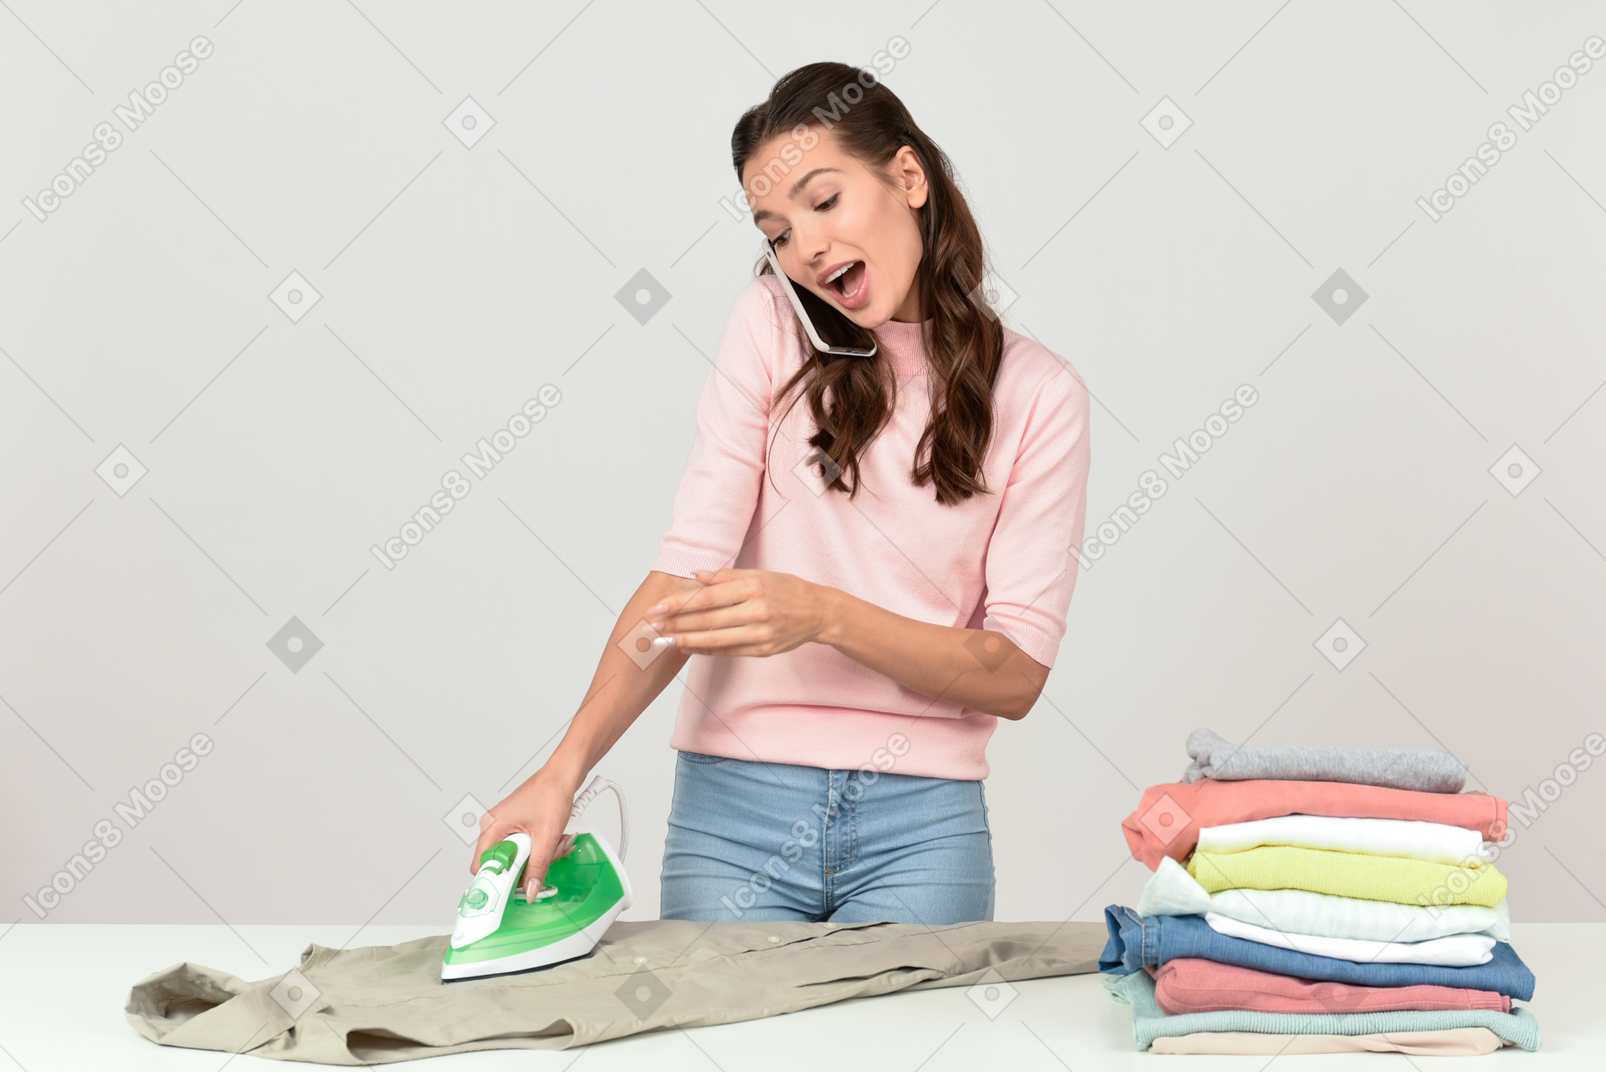 Yeah, i'm doing the ironing now